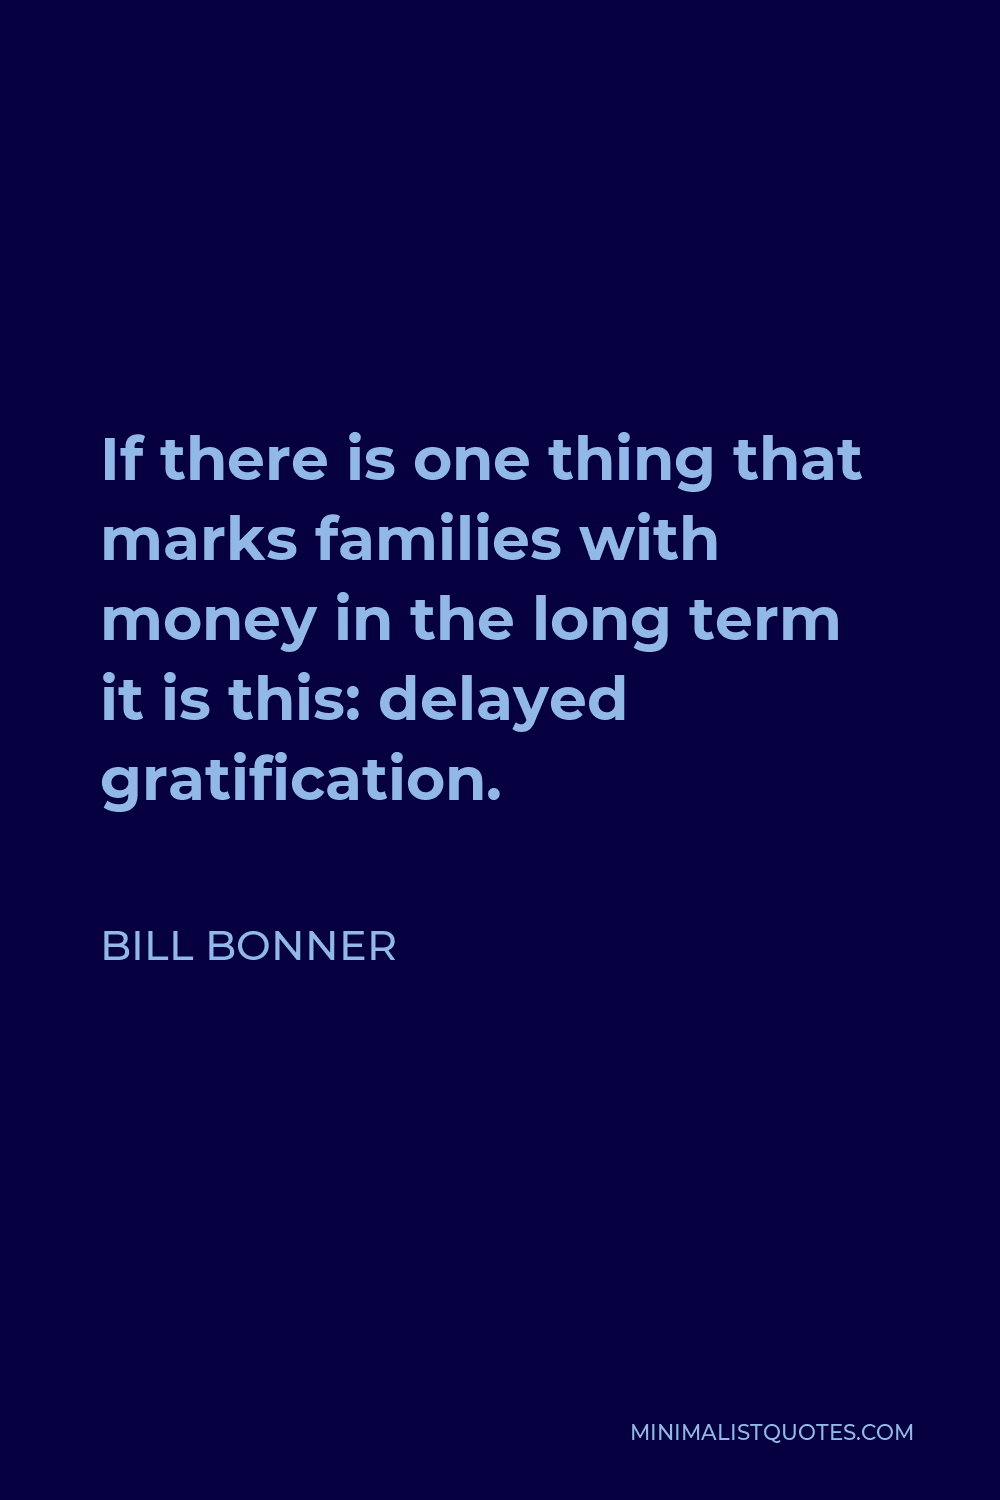 Bill Bonner Quote - If there is one thing that marks families with money in the long term it is this: delayed gratification.